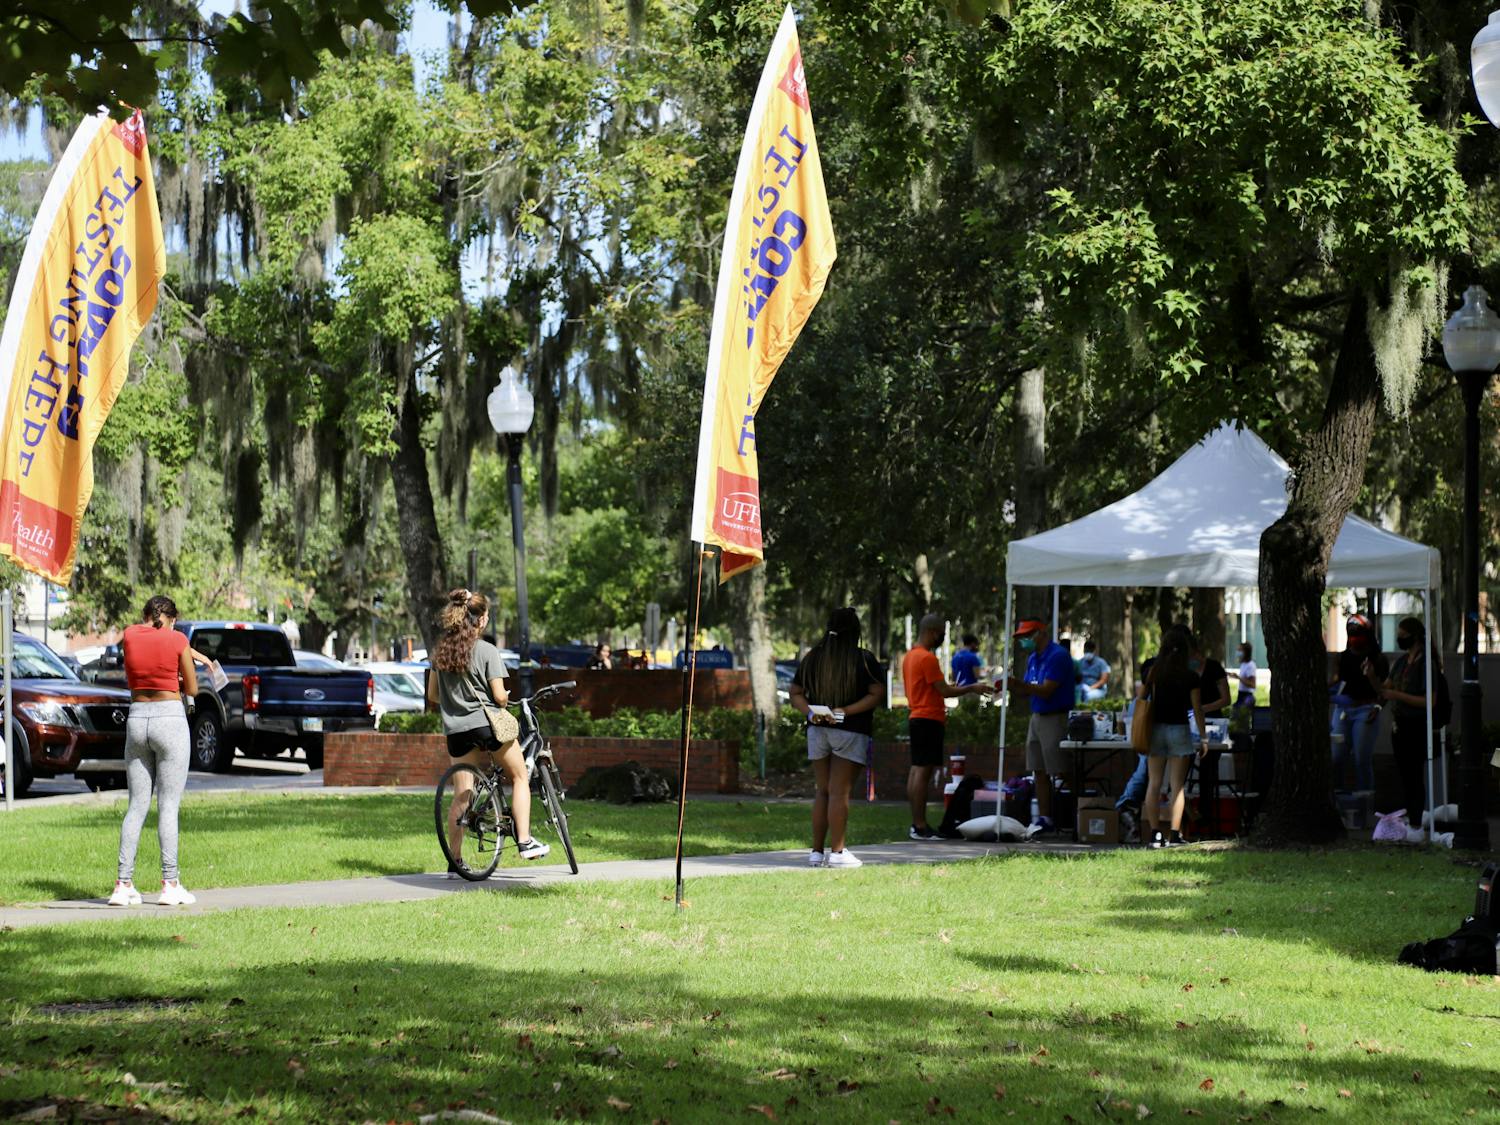 Students are seen waiting in line to be tested at the COVID-19 testing site outside of Murphee Hall on Sept. 24, 2020. Students who wish to get tested are required to fill out an online screening questionnare prior to making an appointment and are asked to bring their Gator One ID card.